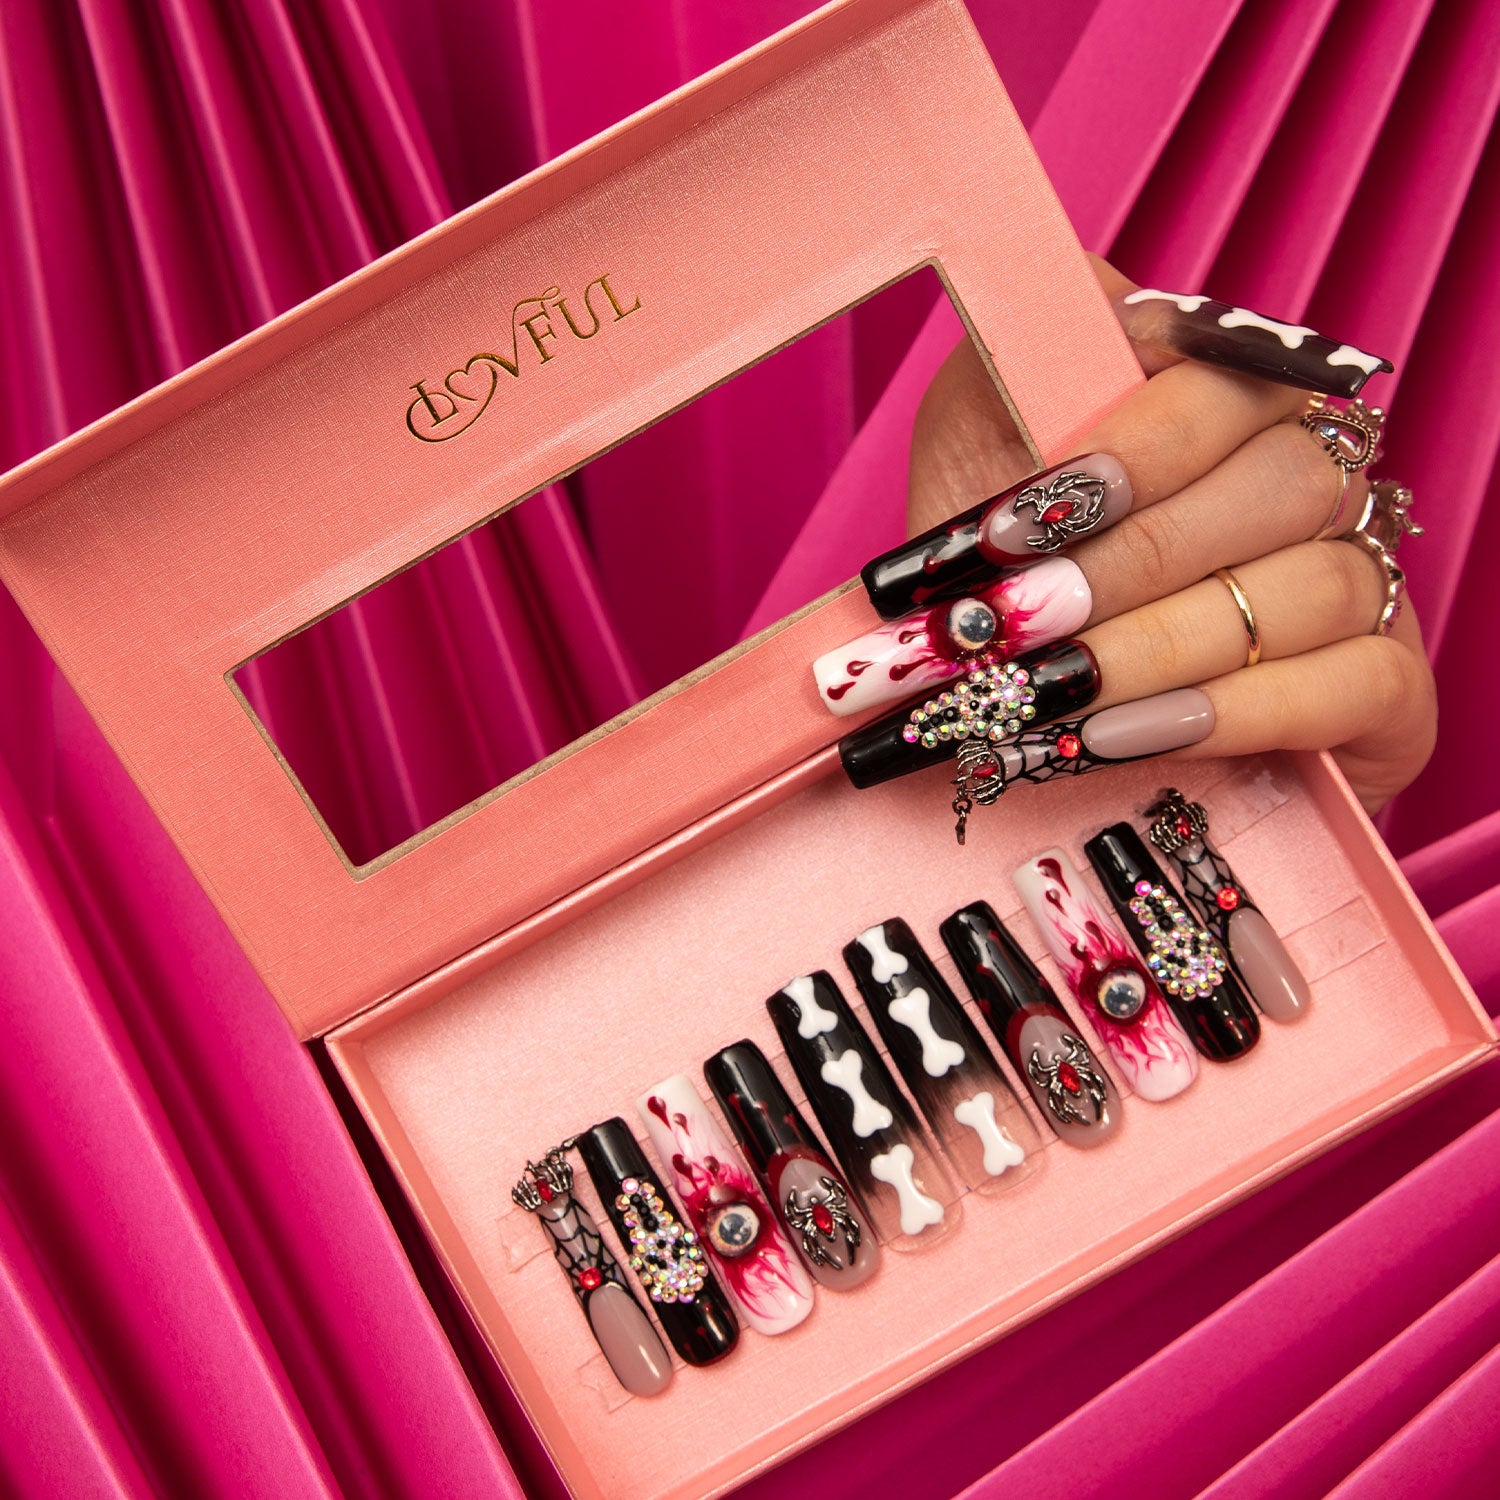 Hand with Halloween-themed press-on nails including eyes, ghosts, bones, and blood patterns holding a pink box containing similar nail designs from Lovful against a pink fabric background.